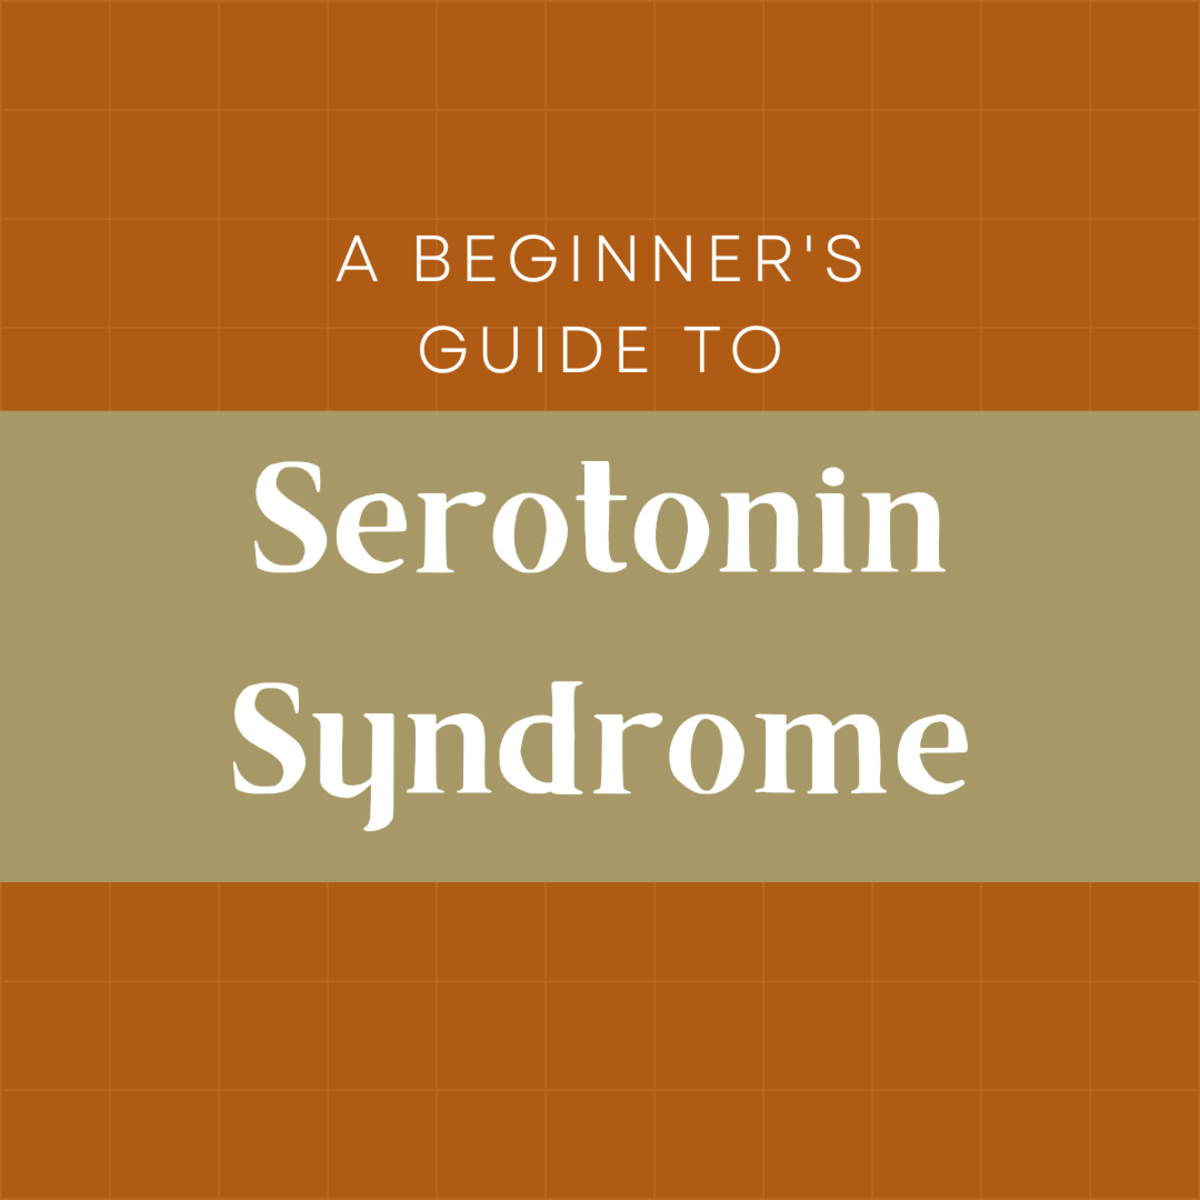 Serotonin syndrome is a serious and potentially dangerous condition that may result from interactions between certain prescription drugs.